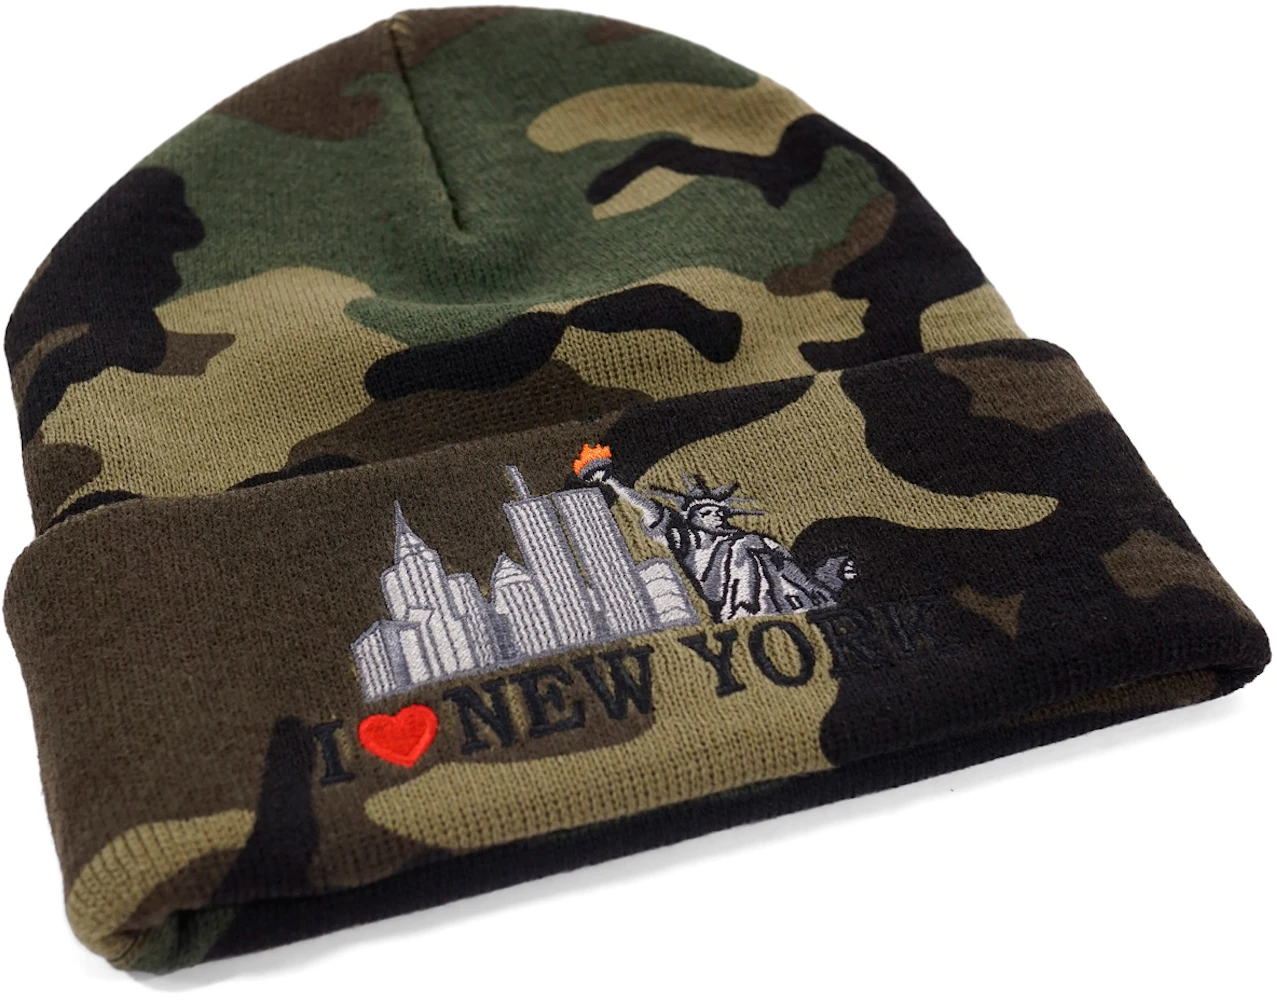 Beanie Supreme Military camouflage Used good, brown supreme louis vuitton  hoodie, hat, beanie, supreme png